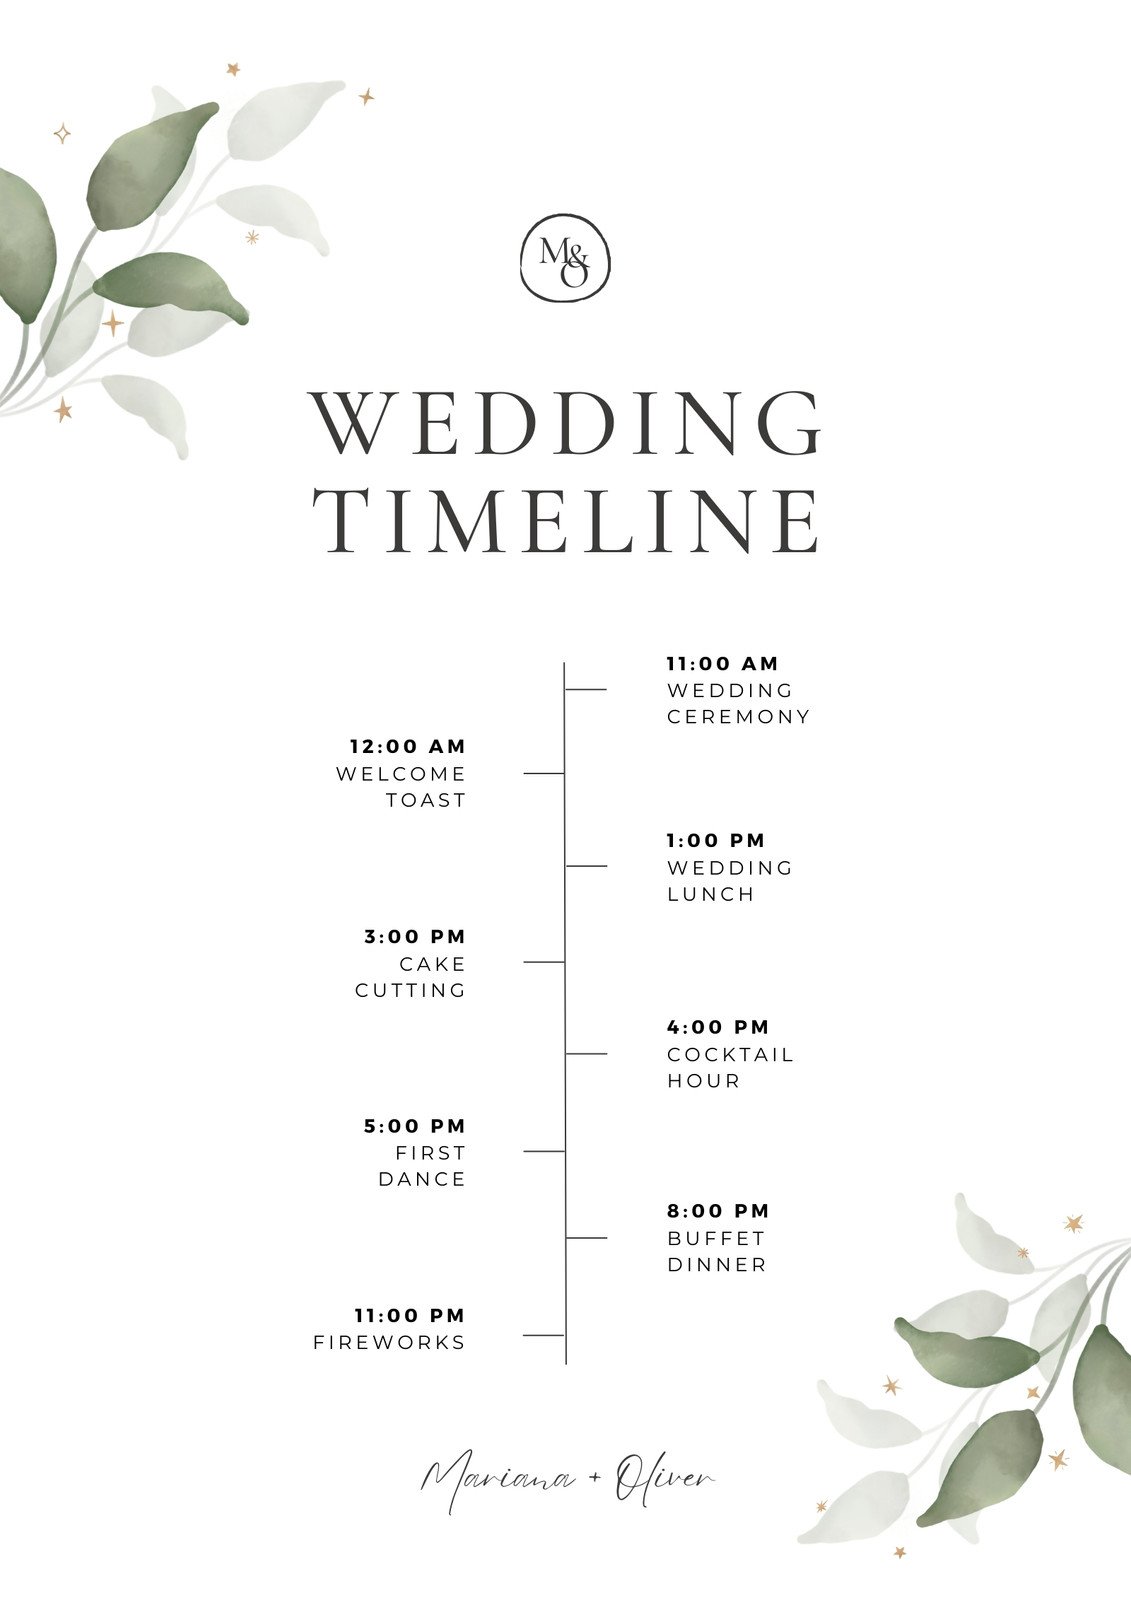 100-Page Editable Wedding Planning Book and Canva Templates – 8.5 x 11